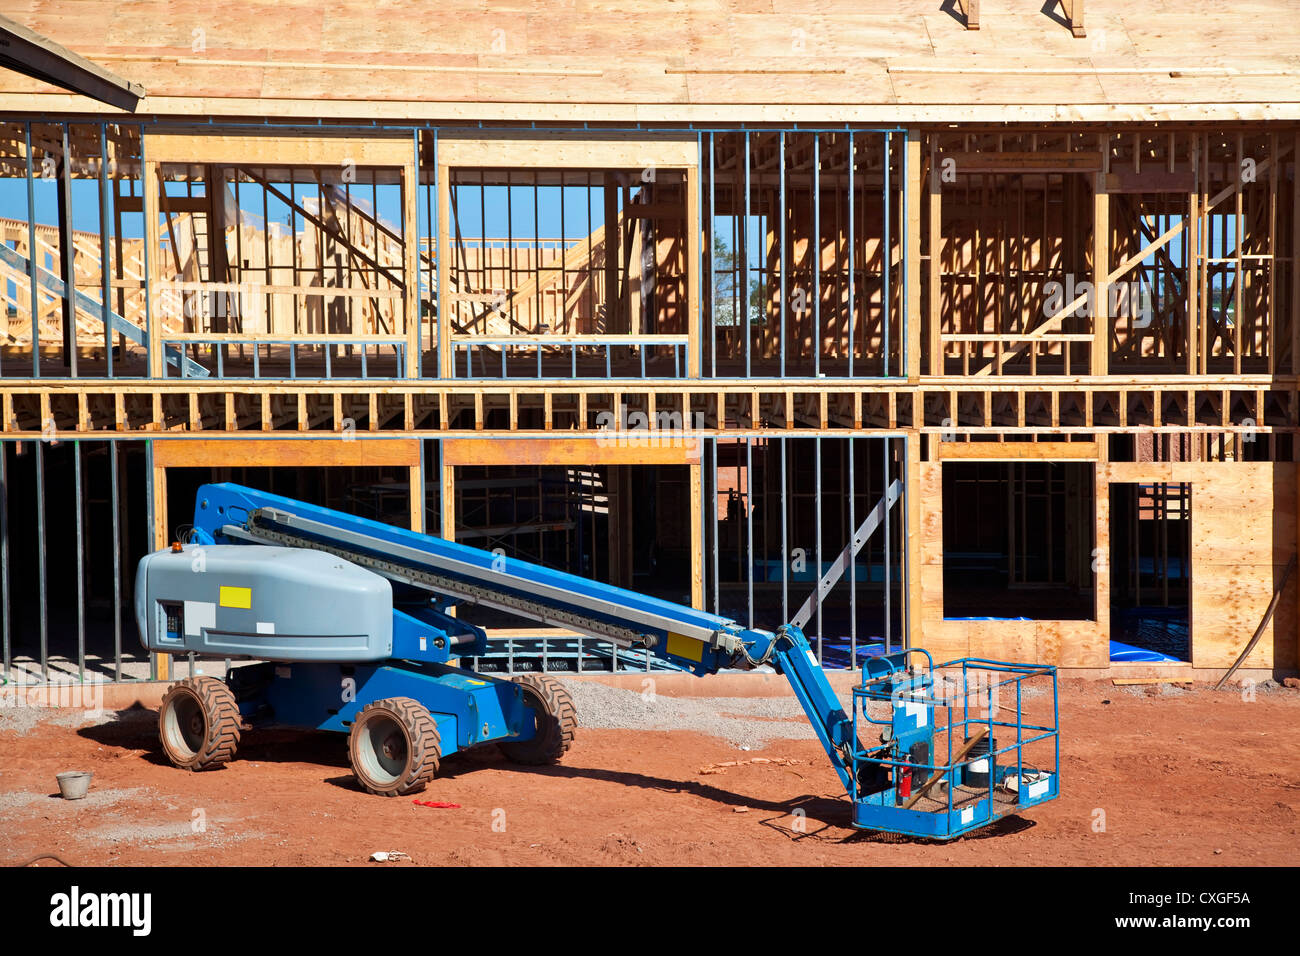 A boom lift with a telescopic arm on a construction site. Stock Photo